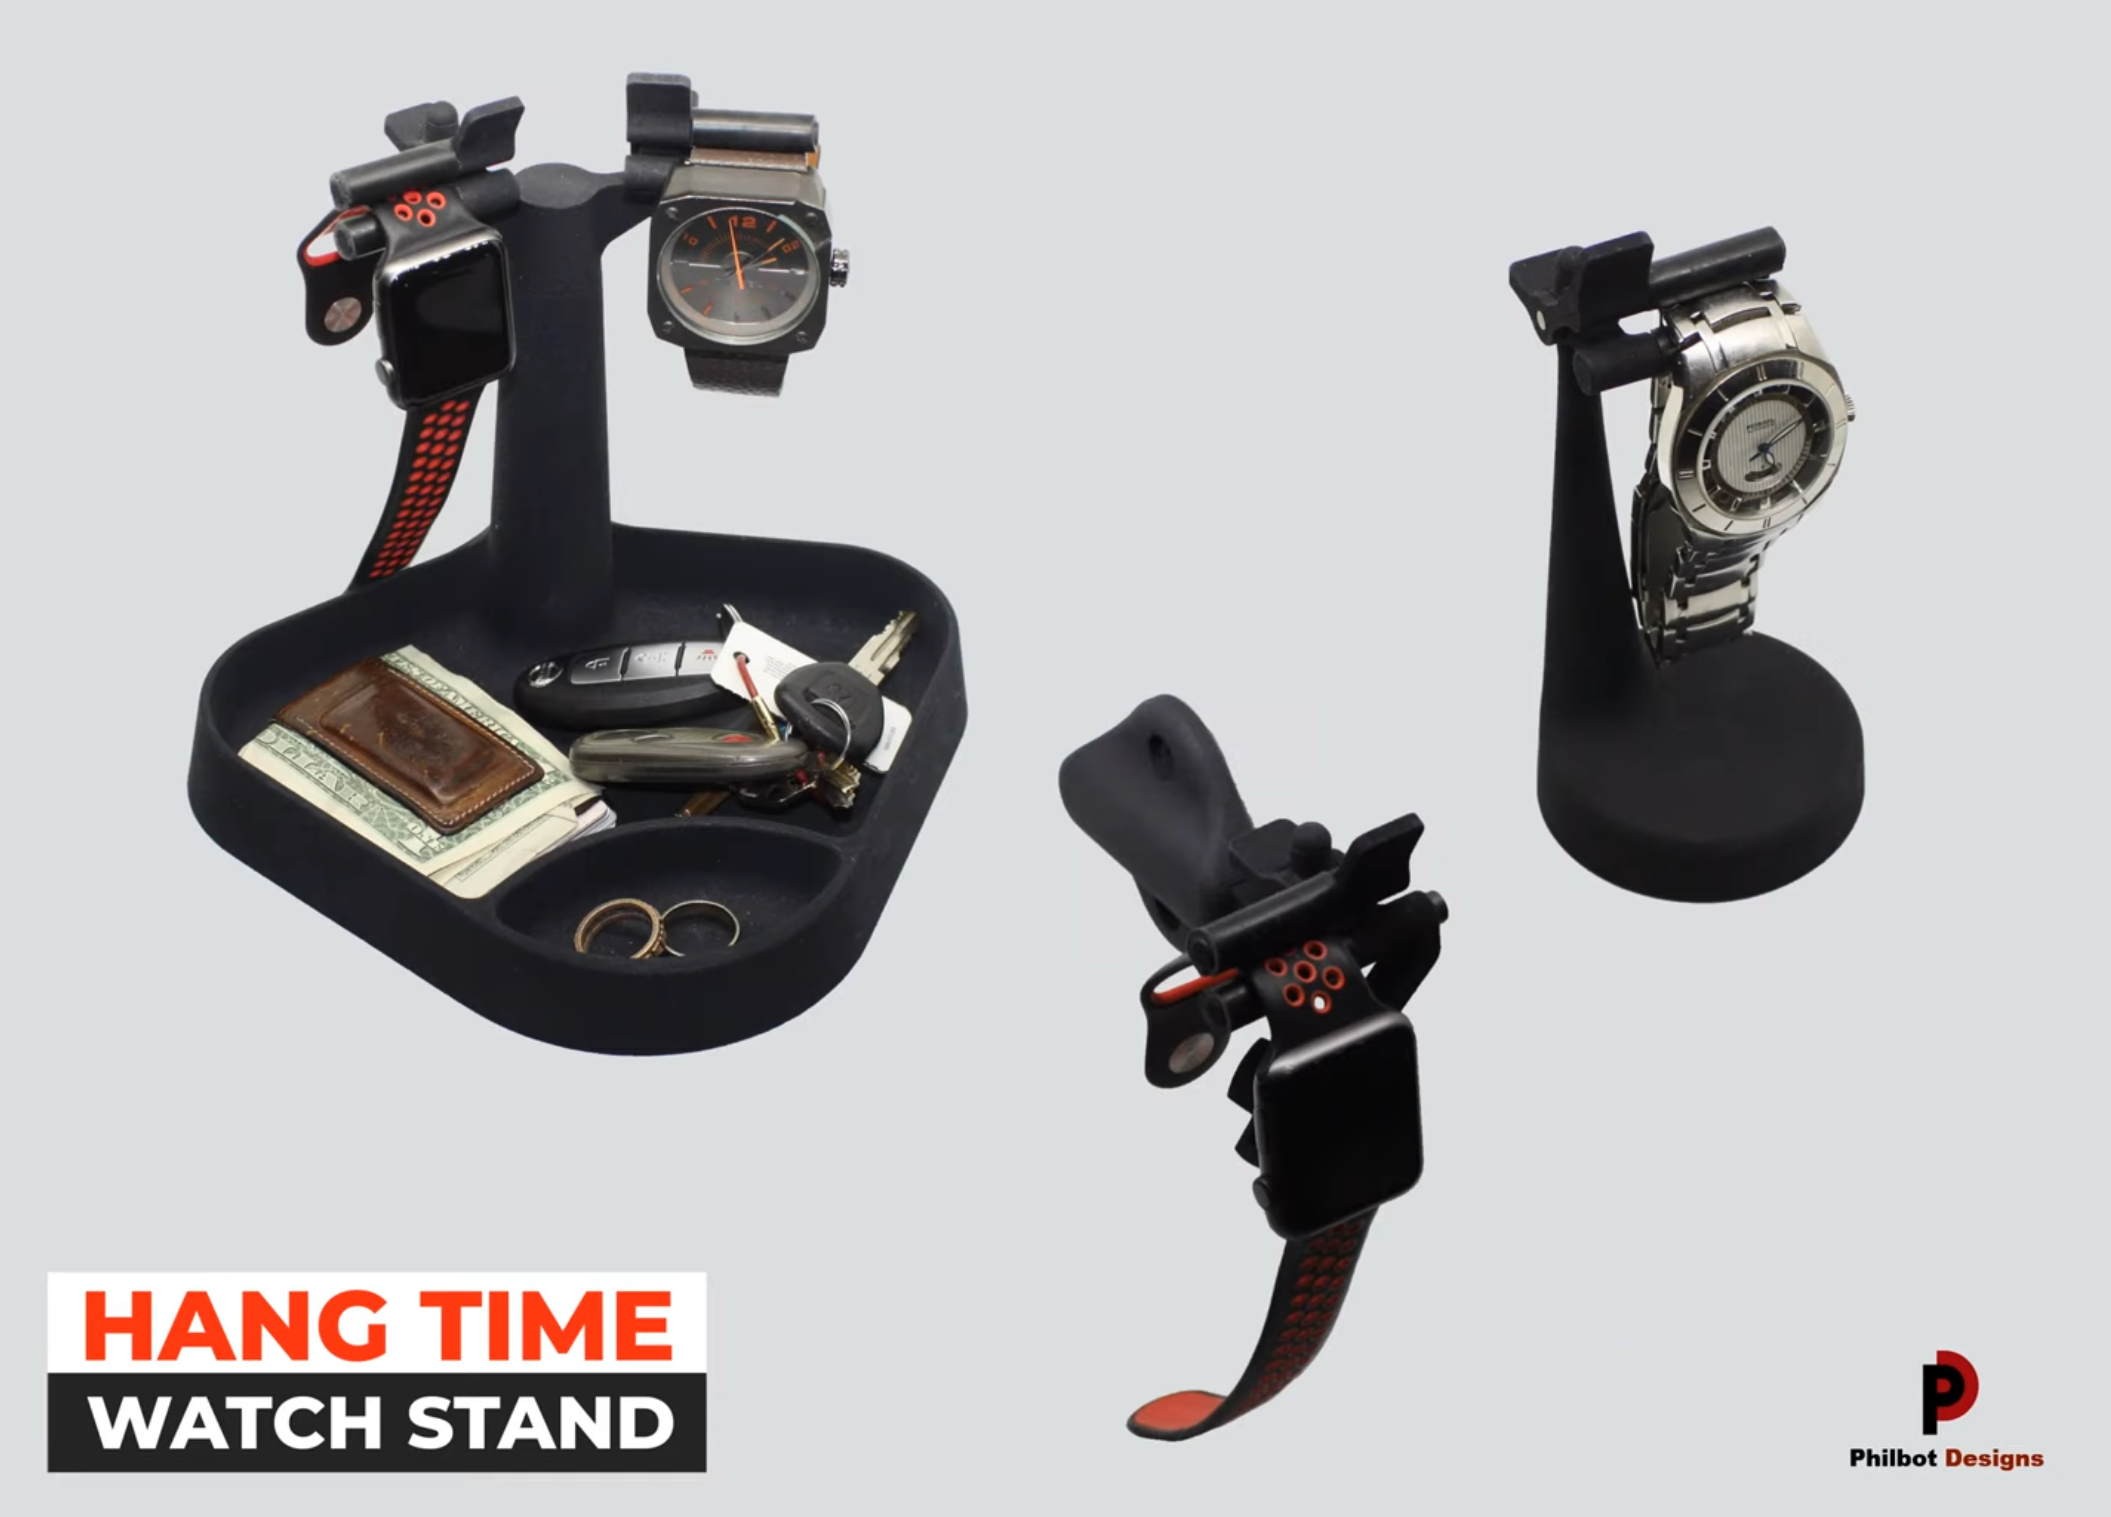 mhy-hang-time-watch-stand